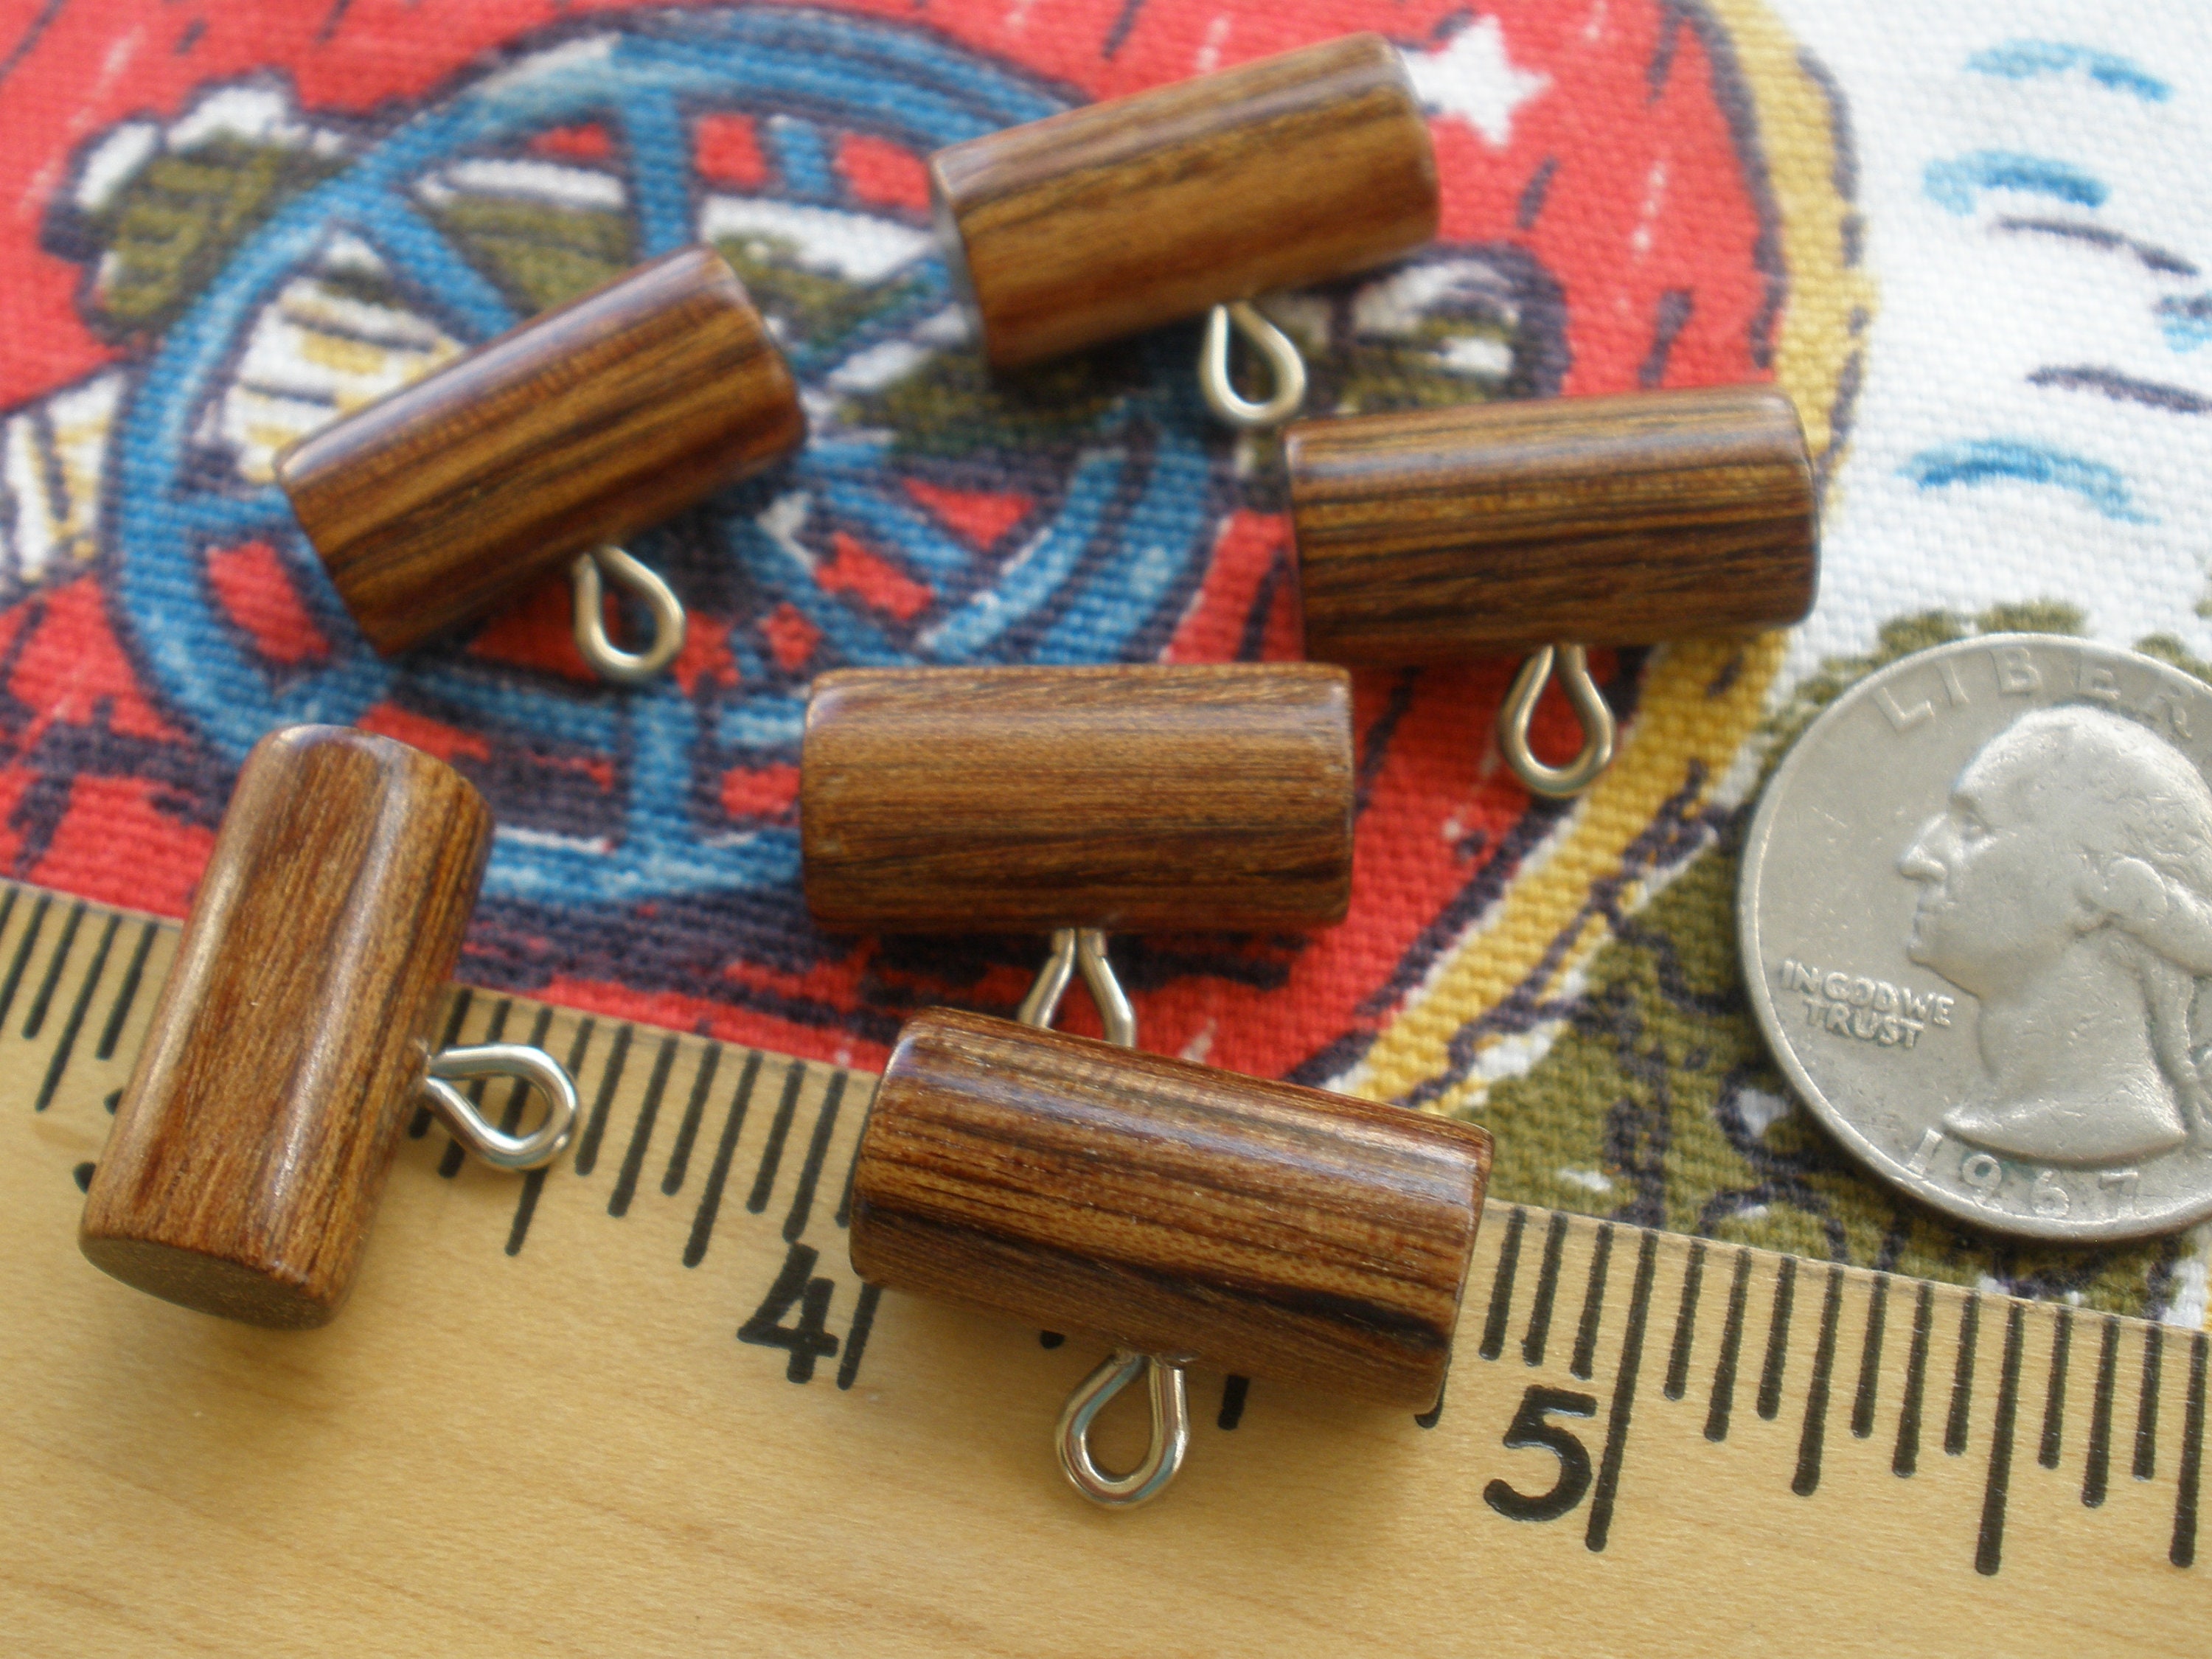 60pcs Wooden Toggle Buttons BrownL Wooden Button in Sewing for Coats, Size: 50 mm x 13 mm